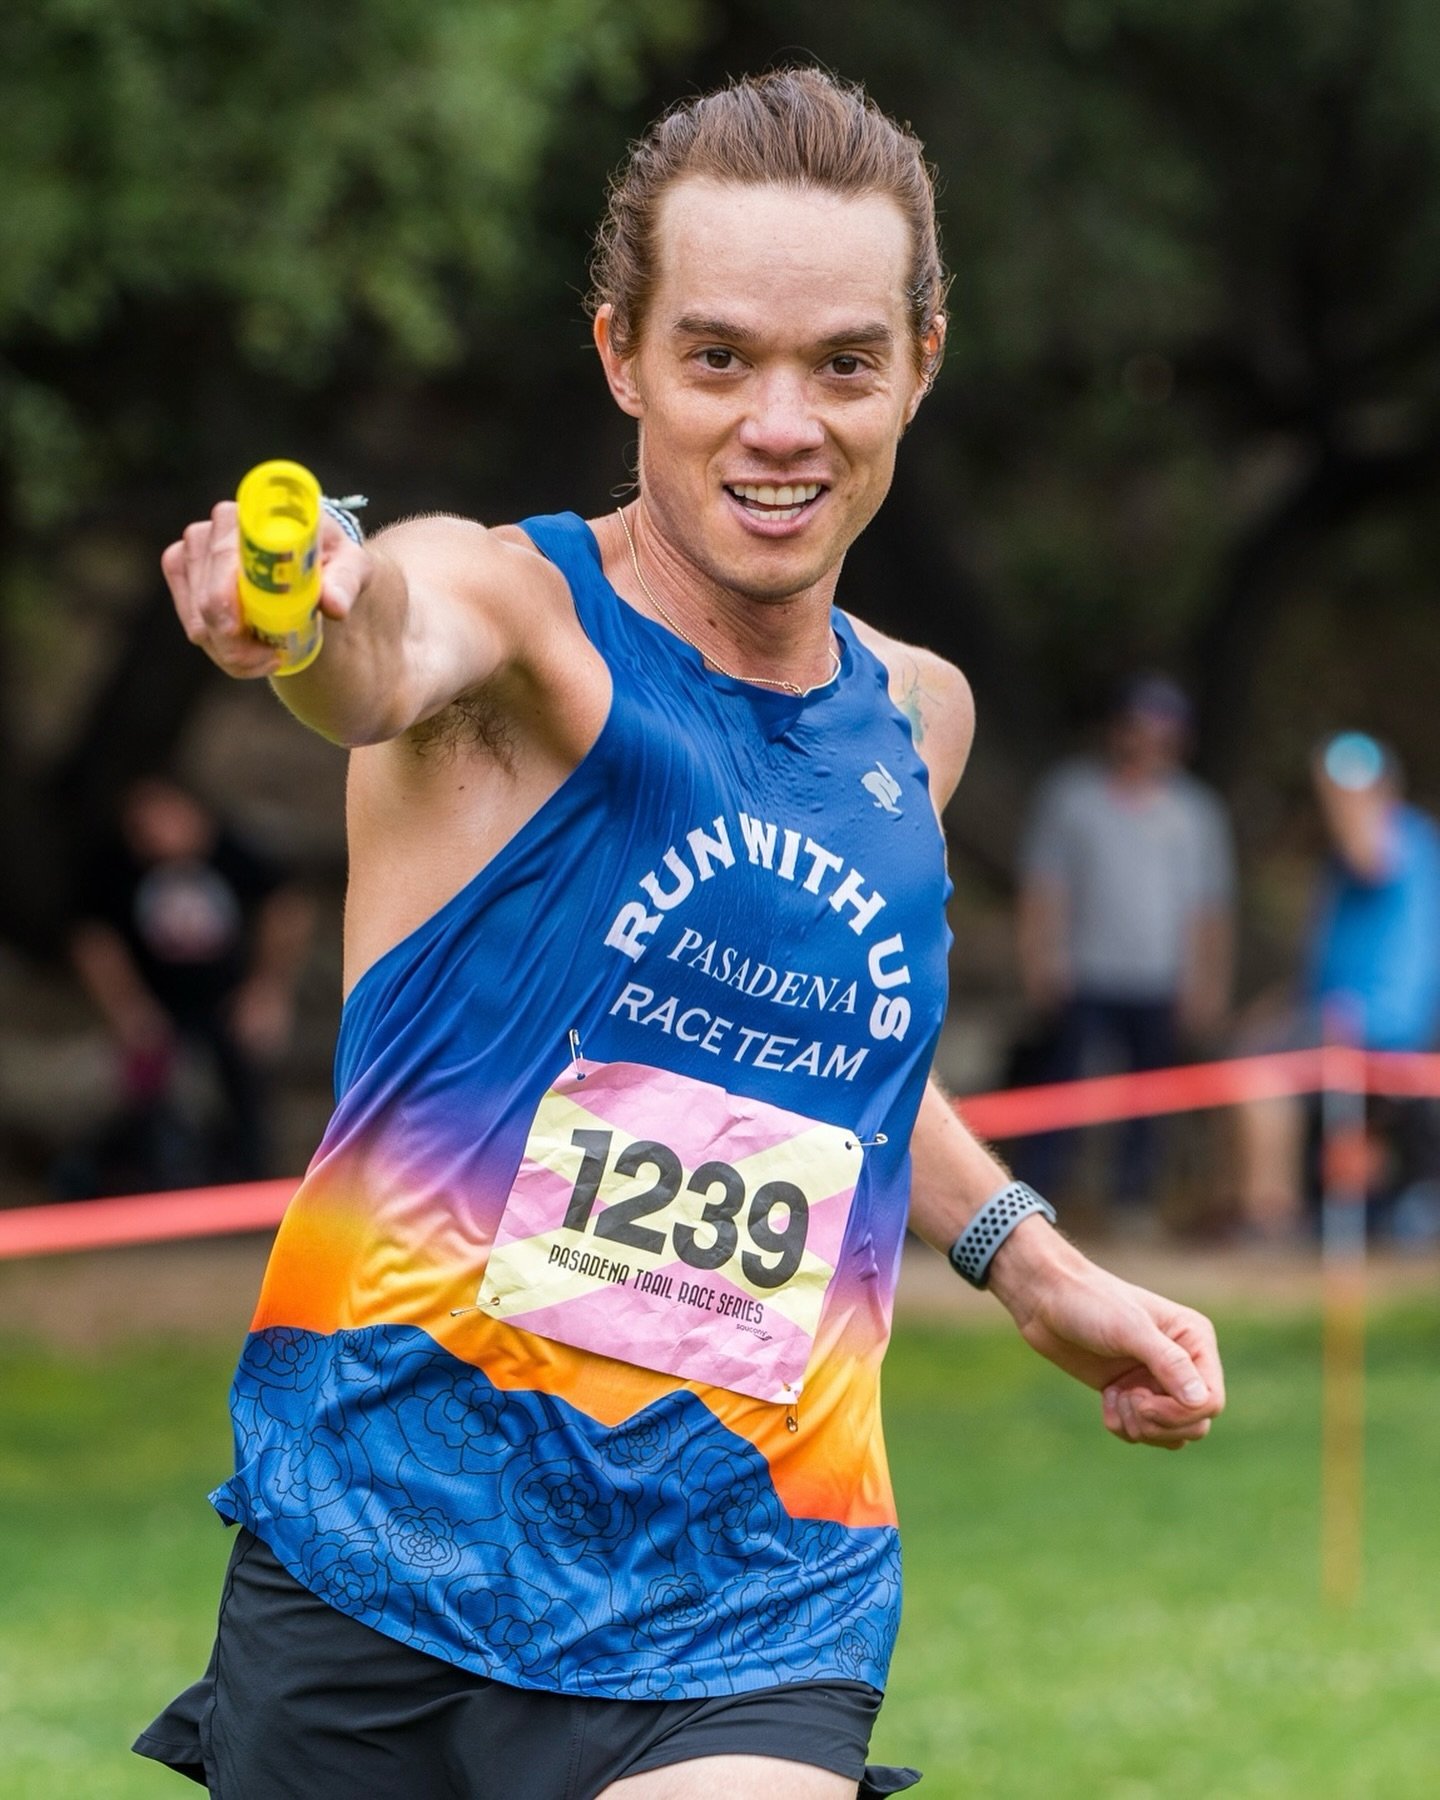 What 👏 A 👏 Weekend!! We spent Sunday morning having a blast successfully defending our titles at the 50k Relay in the mens and co-ed divisions! 😅 

The day before was action packed as well with James getting the win at the Mount Wilson Trail Race!